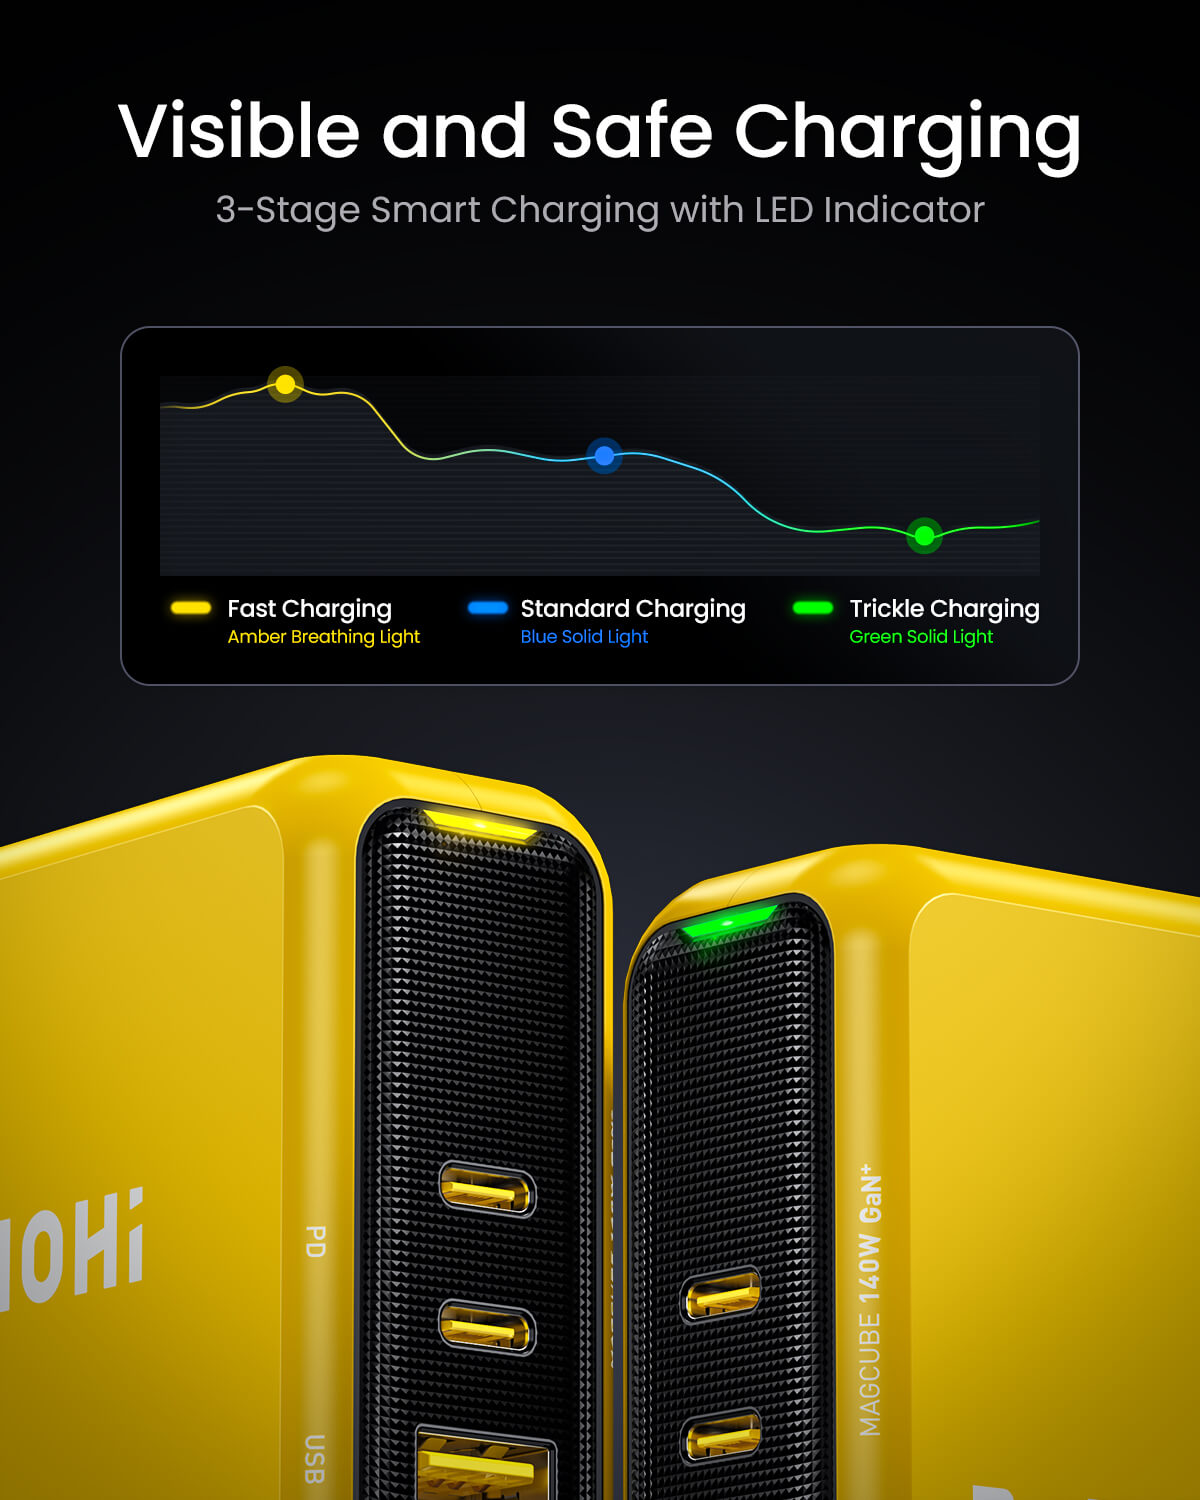 AOHI Magcube 140W GaN+ 3-Port USB-C and USB-A Fast Charger - AOHi